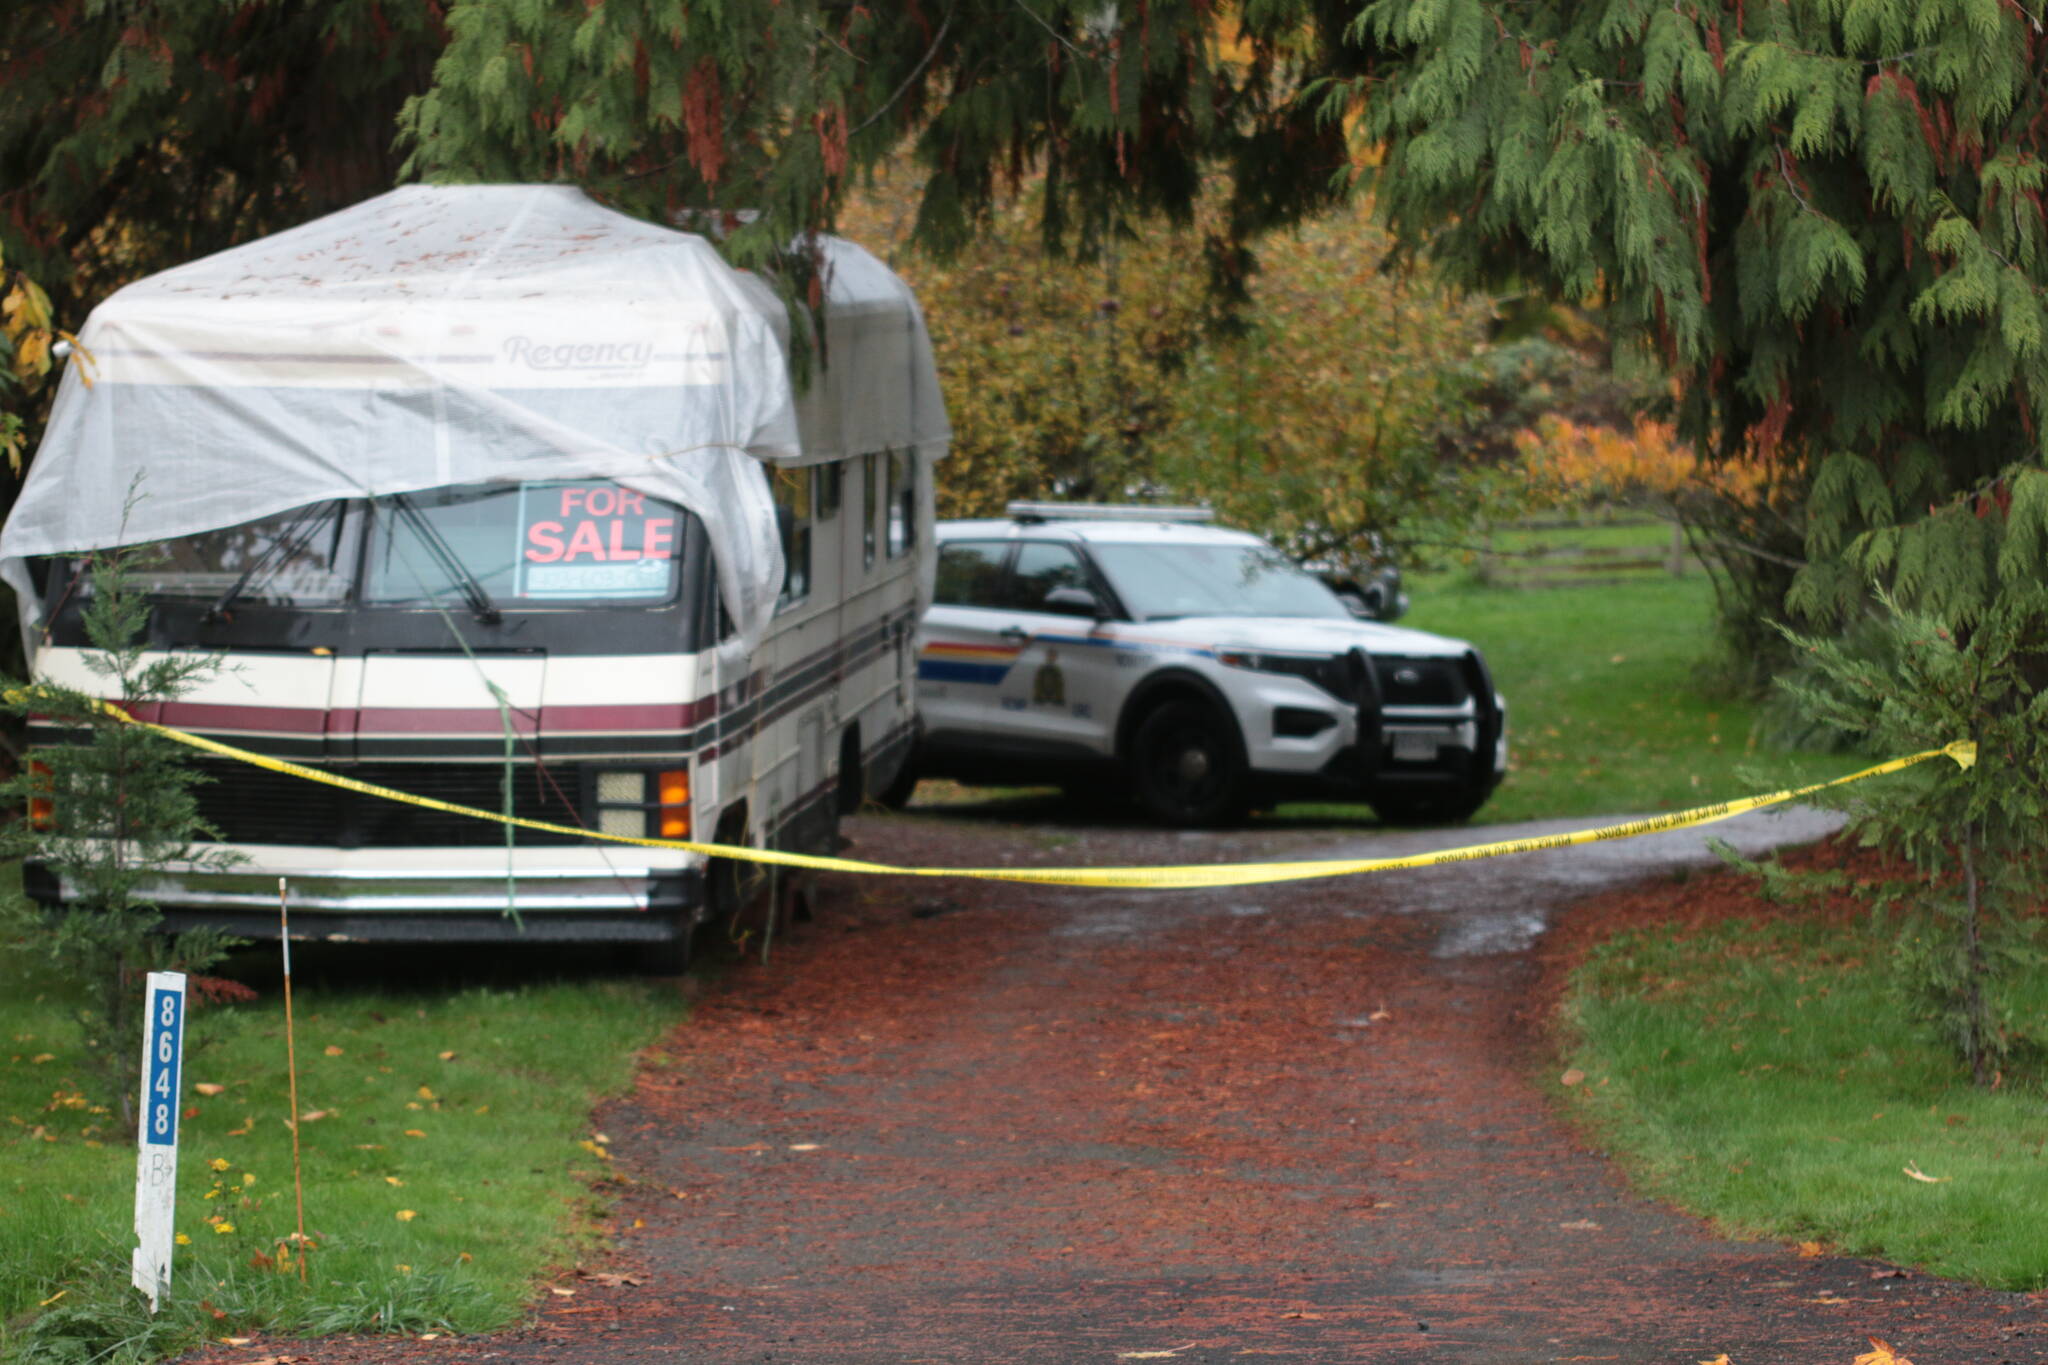 Police are investigating an alleged double homicide in Crofton. (Kevin Rothbauer/Citizen)